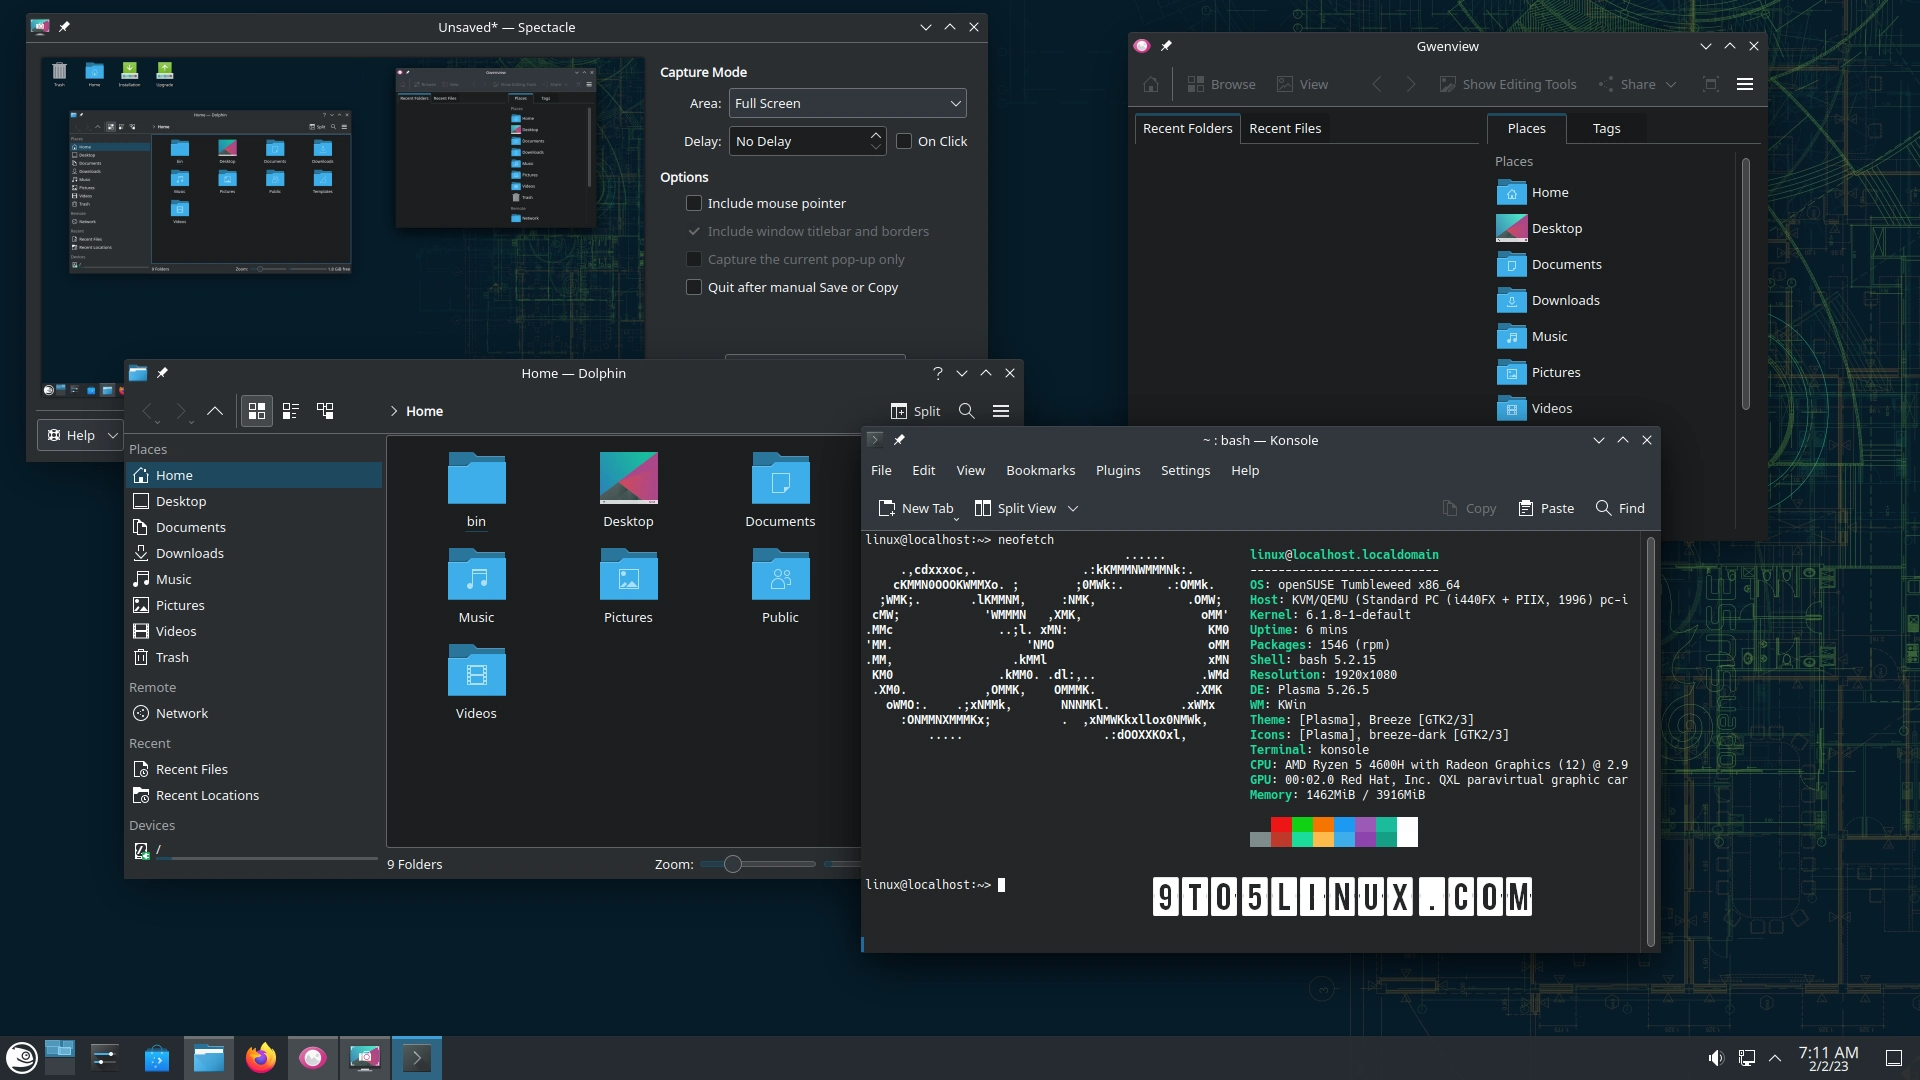 KDE Gear 23.08.1 Improves Dolphin, Gwenview, Kdenlive, and Other KDE Apps